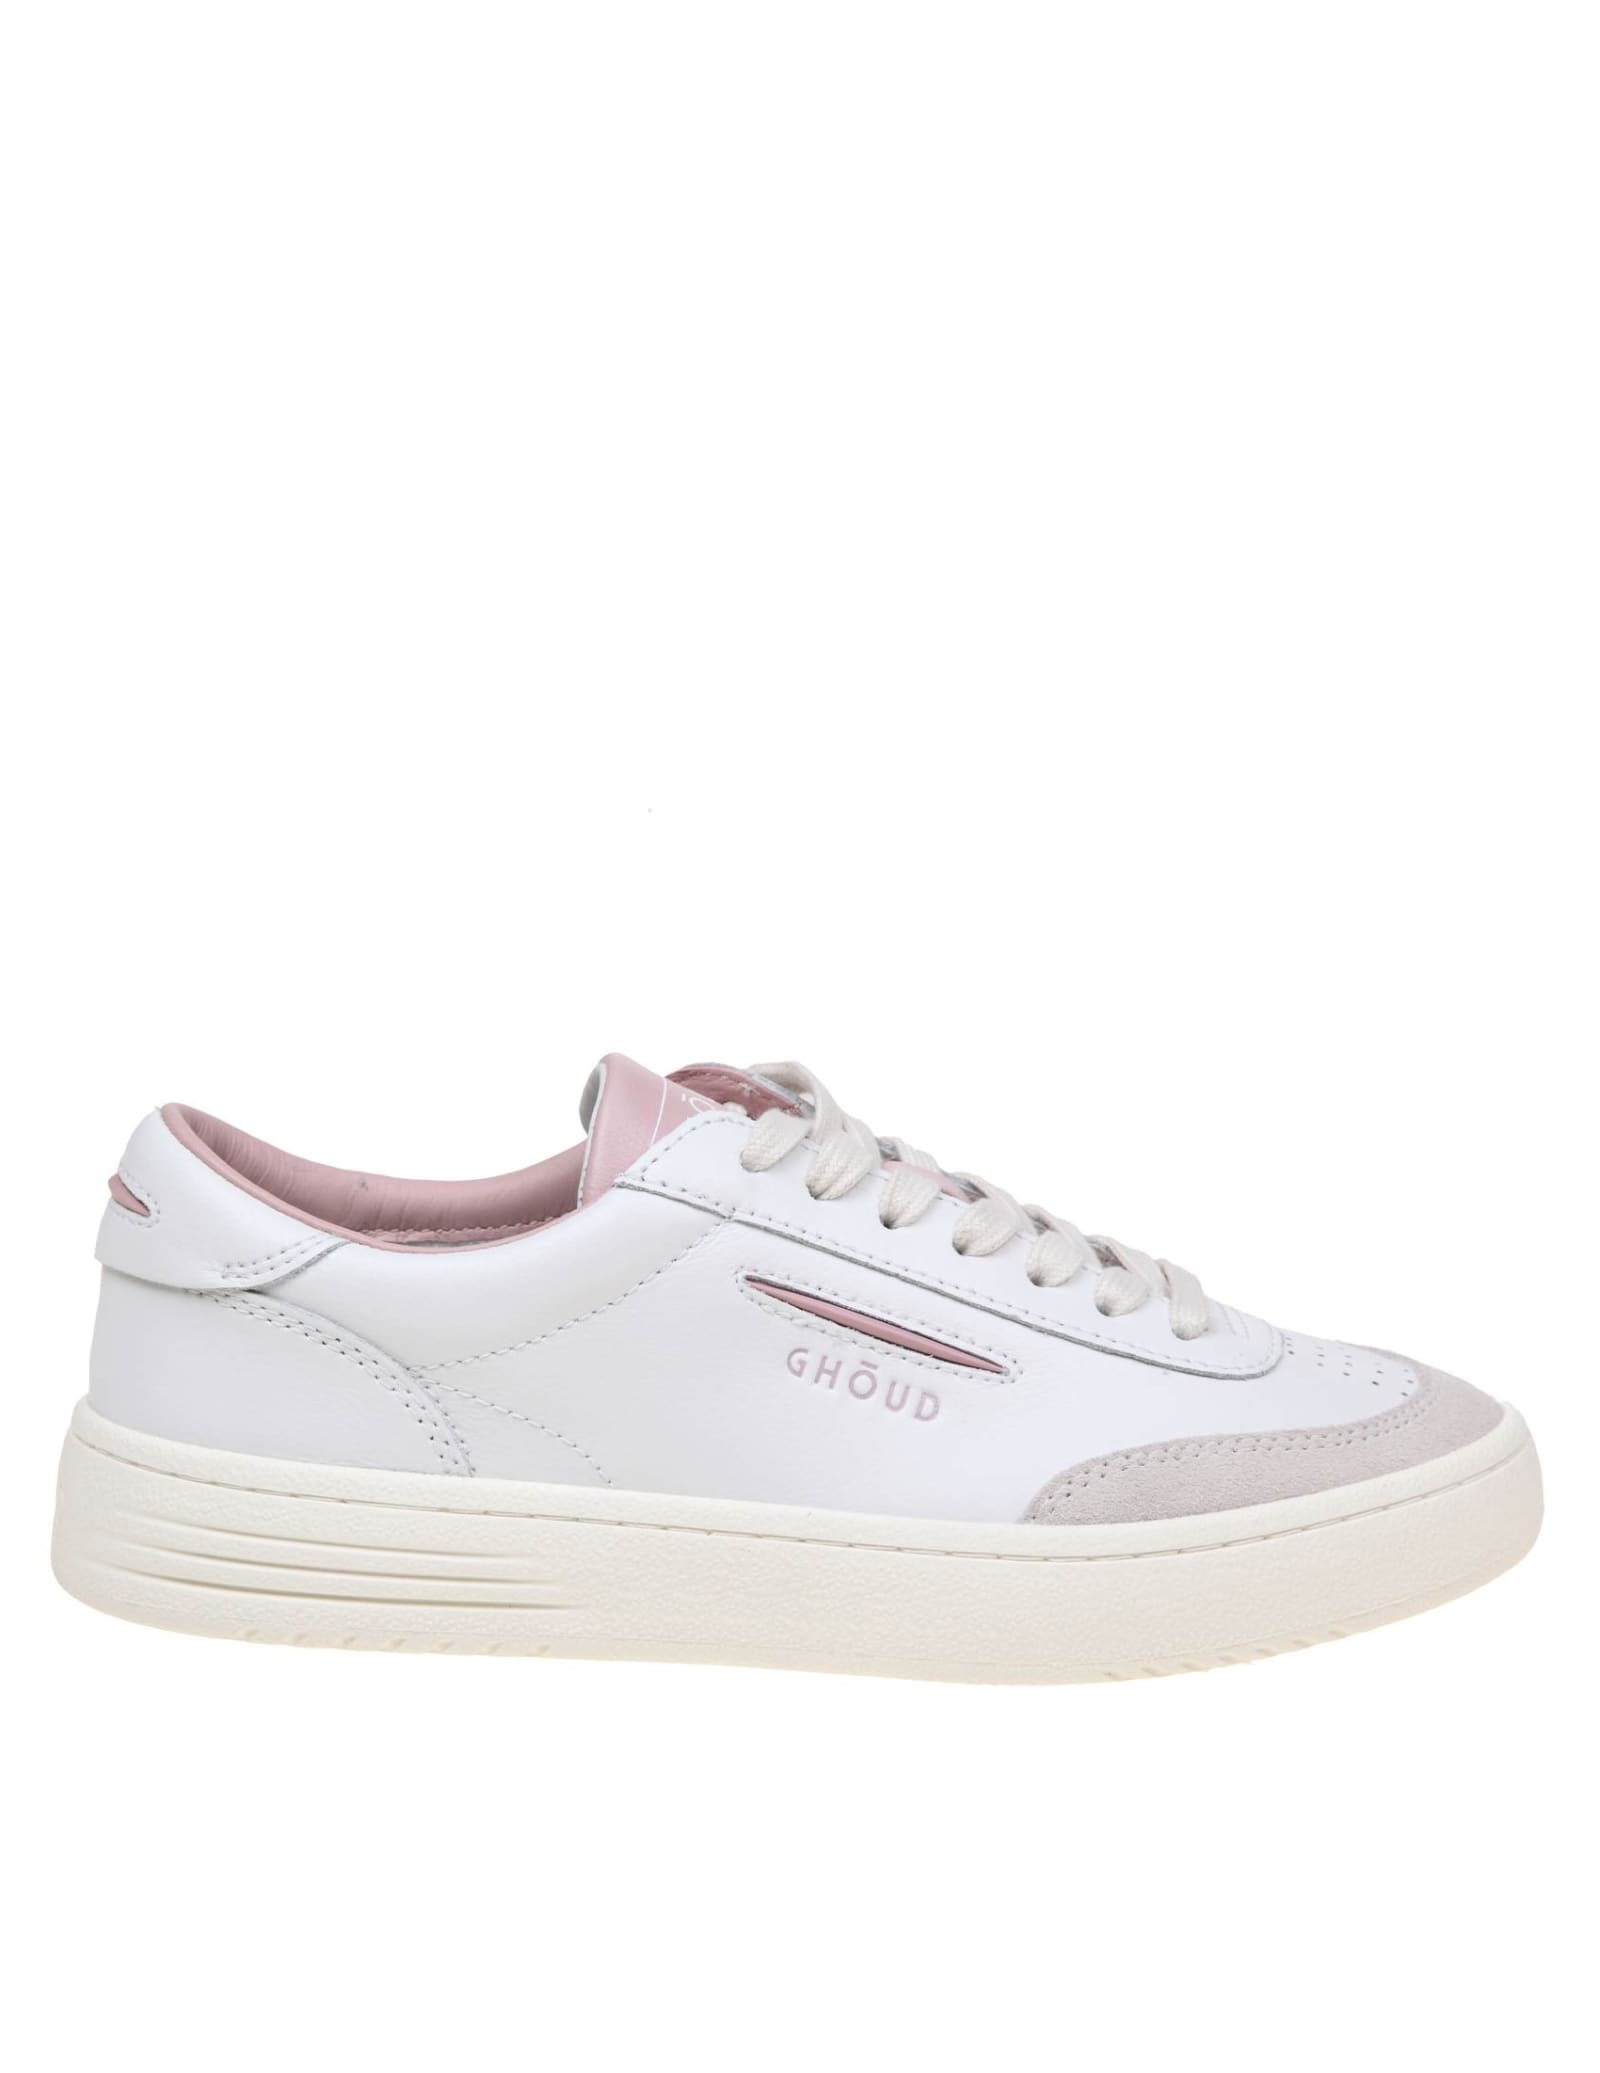 Lido Low Sneakers In White/pink Leather And Suede